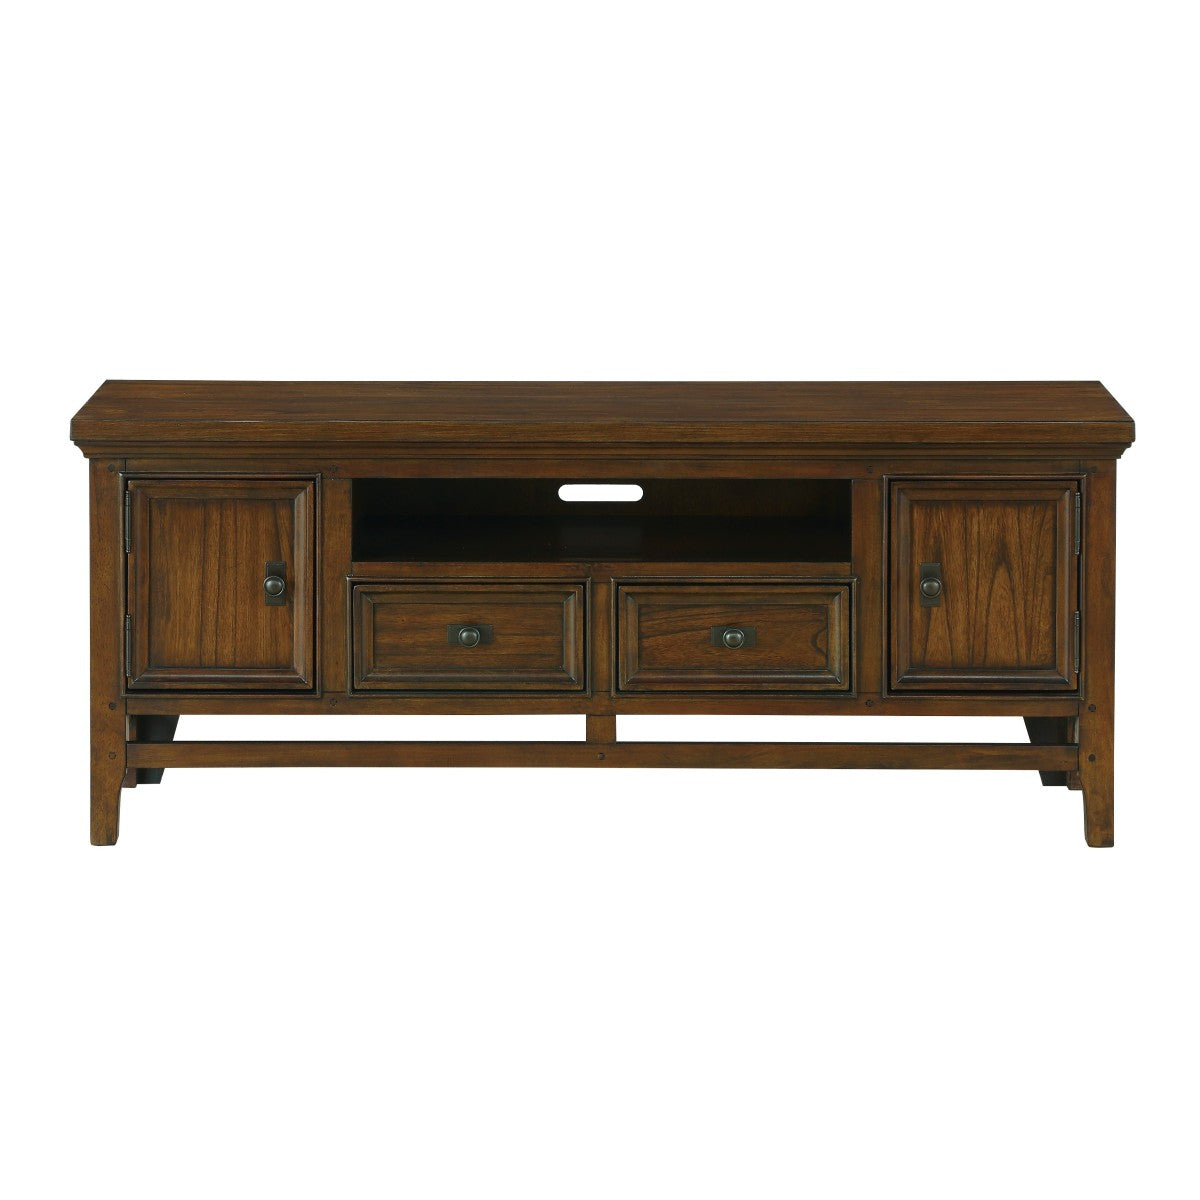 Frazier Park Brown Cherry Modern Traditional Solid Wood And Engineered Wood Tv Stand